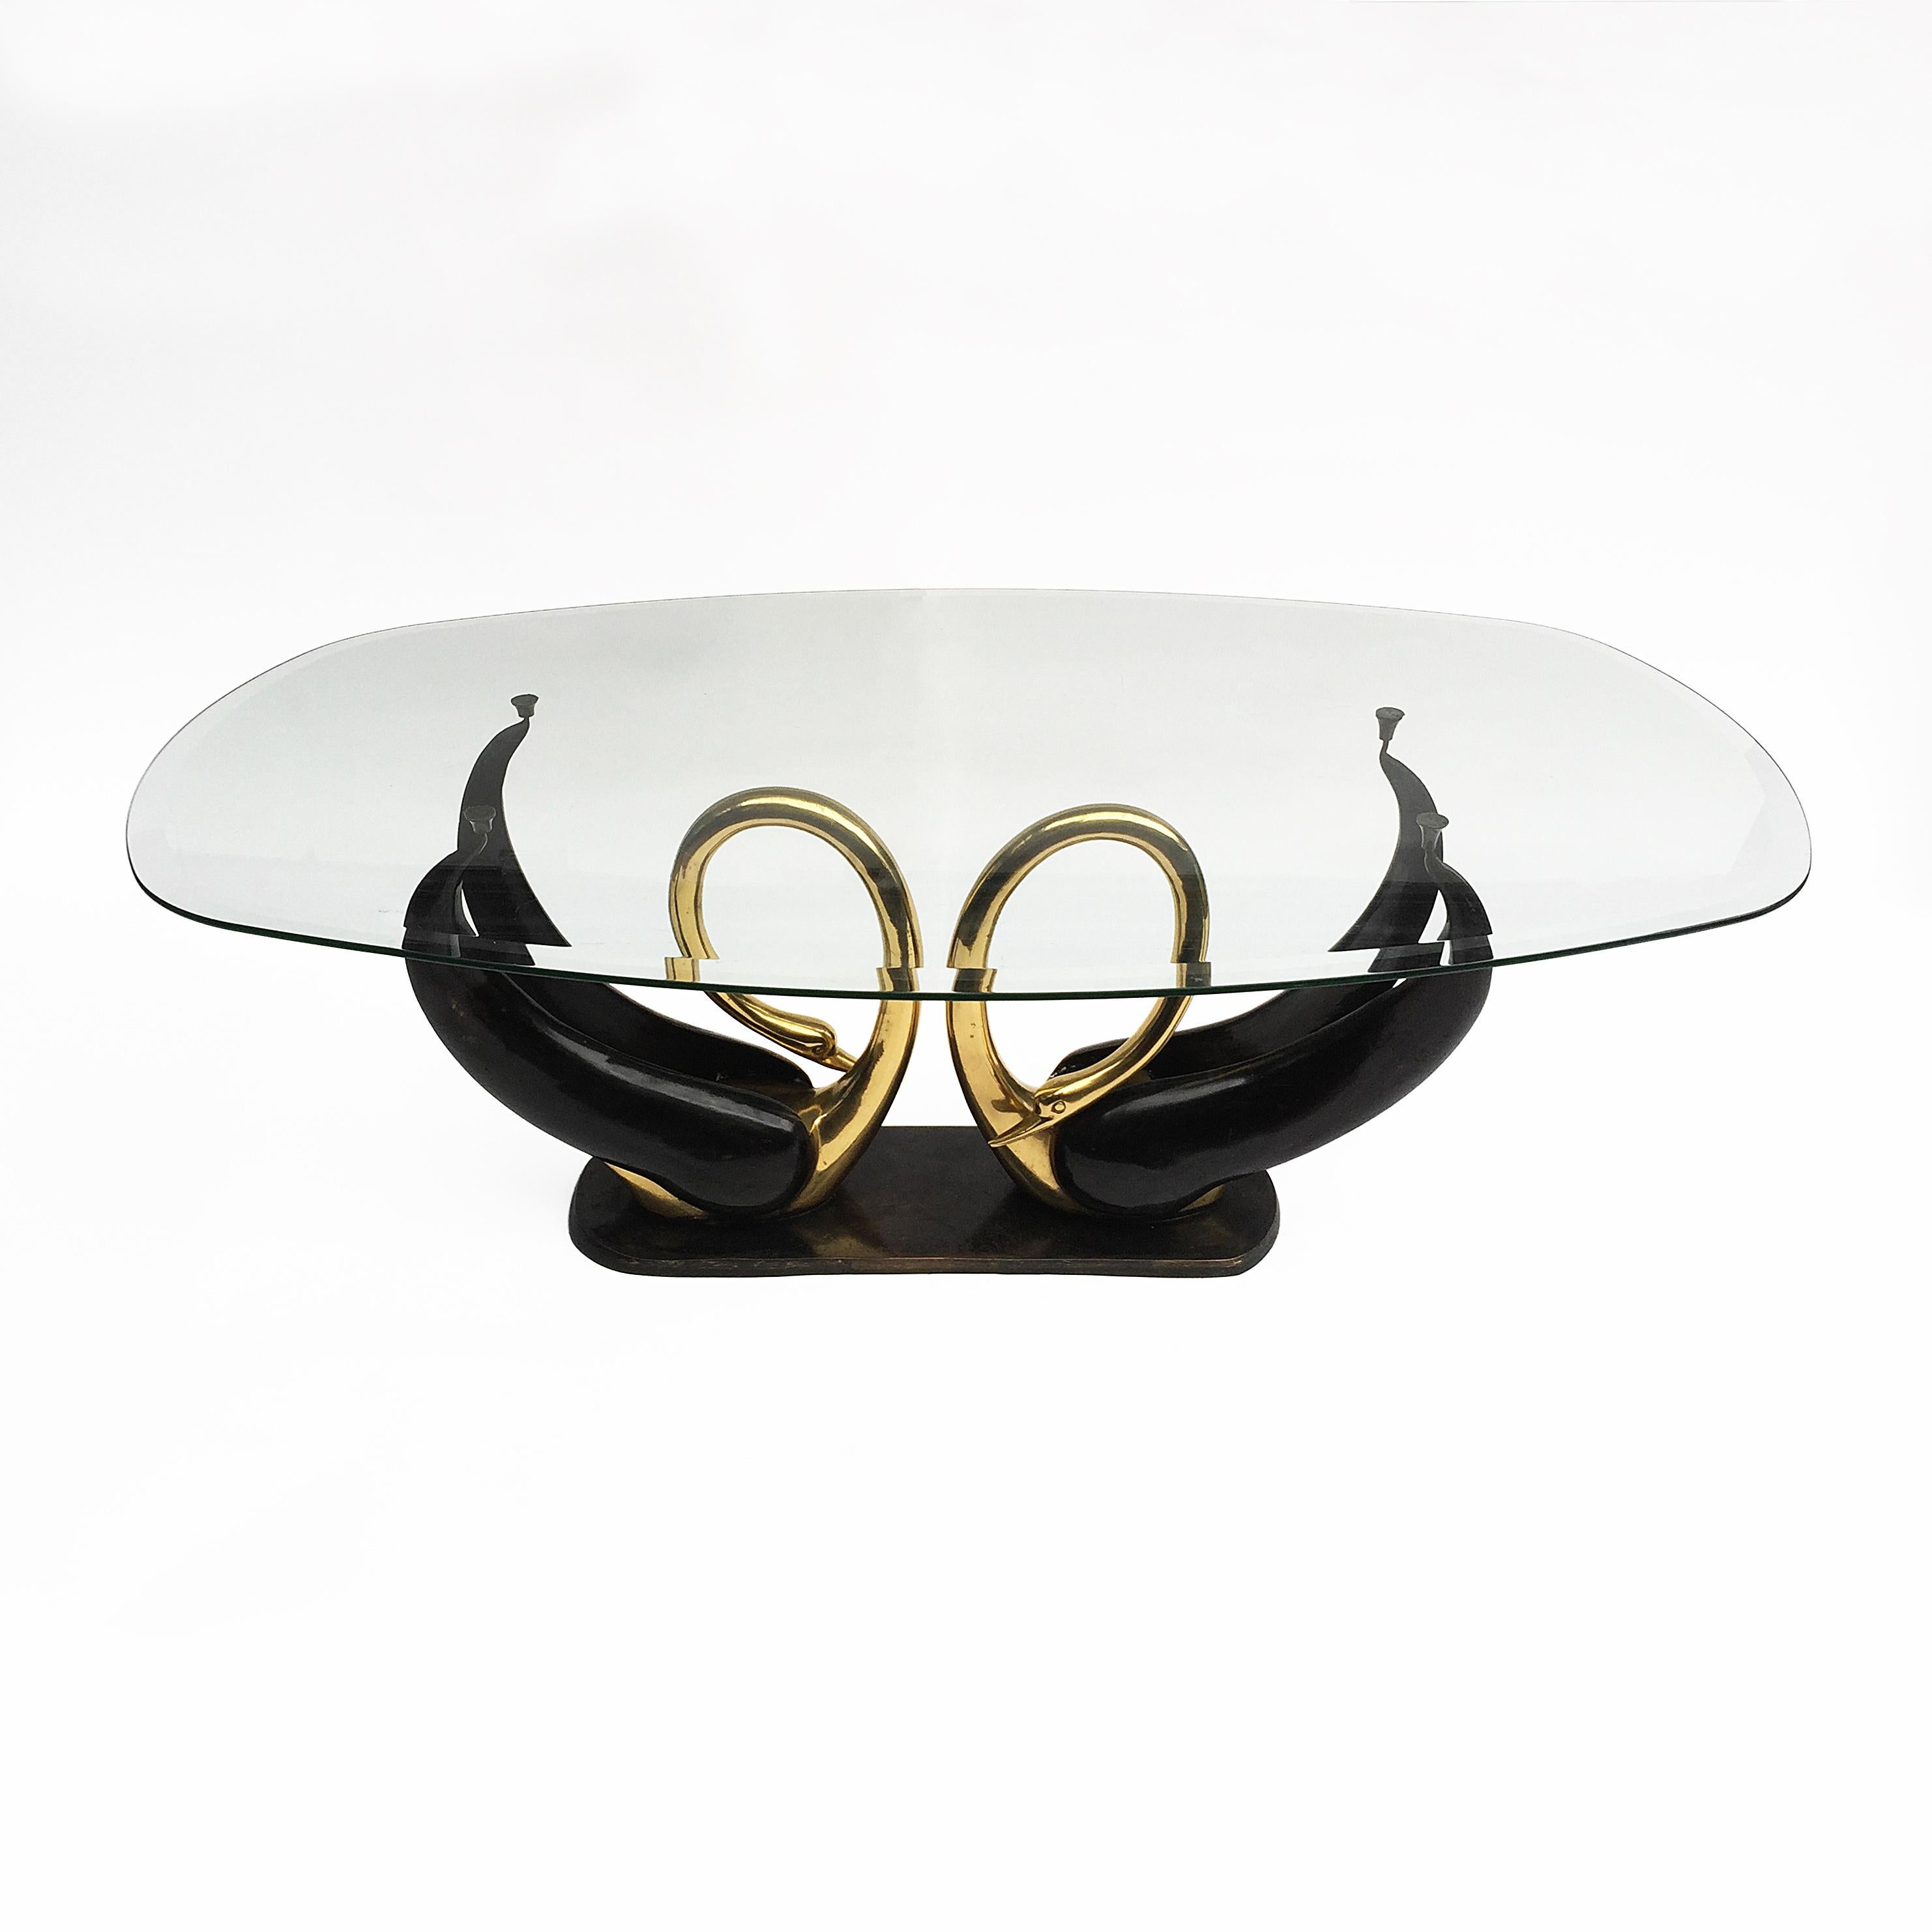 French Maison Jansen Brass Love Swans Coffee Table with Beveled Oval Glass Top, 1970s For Sale